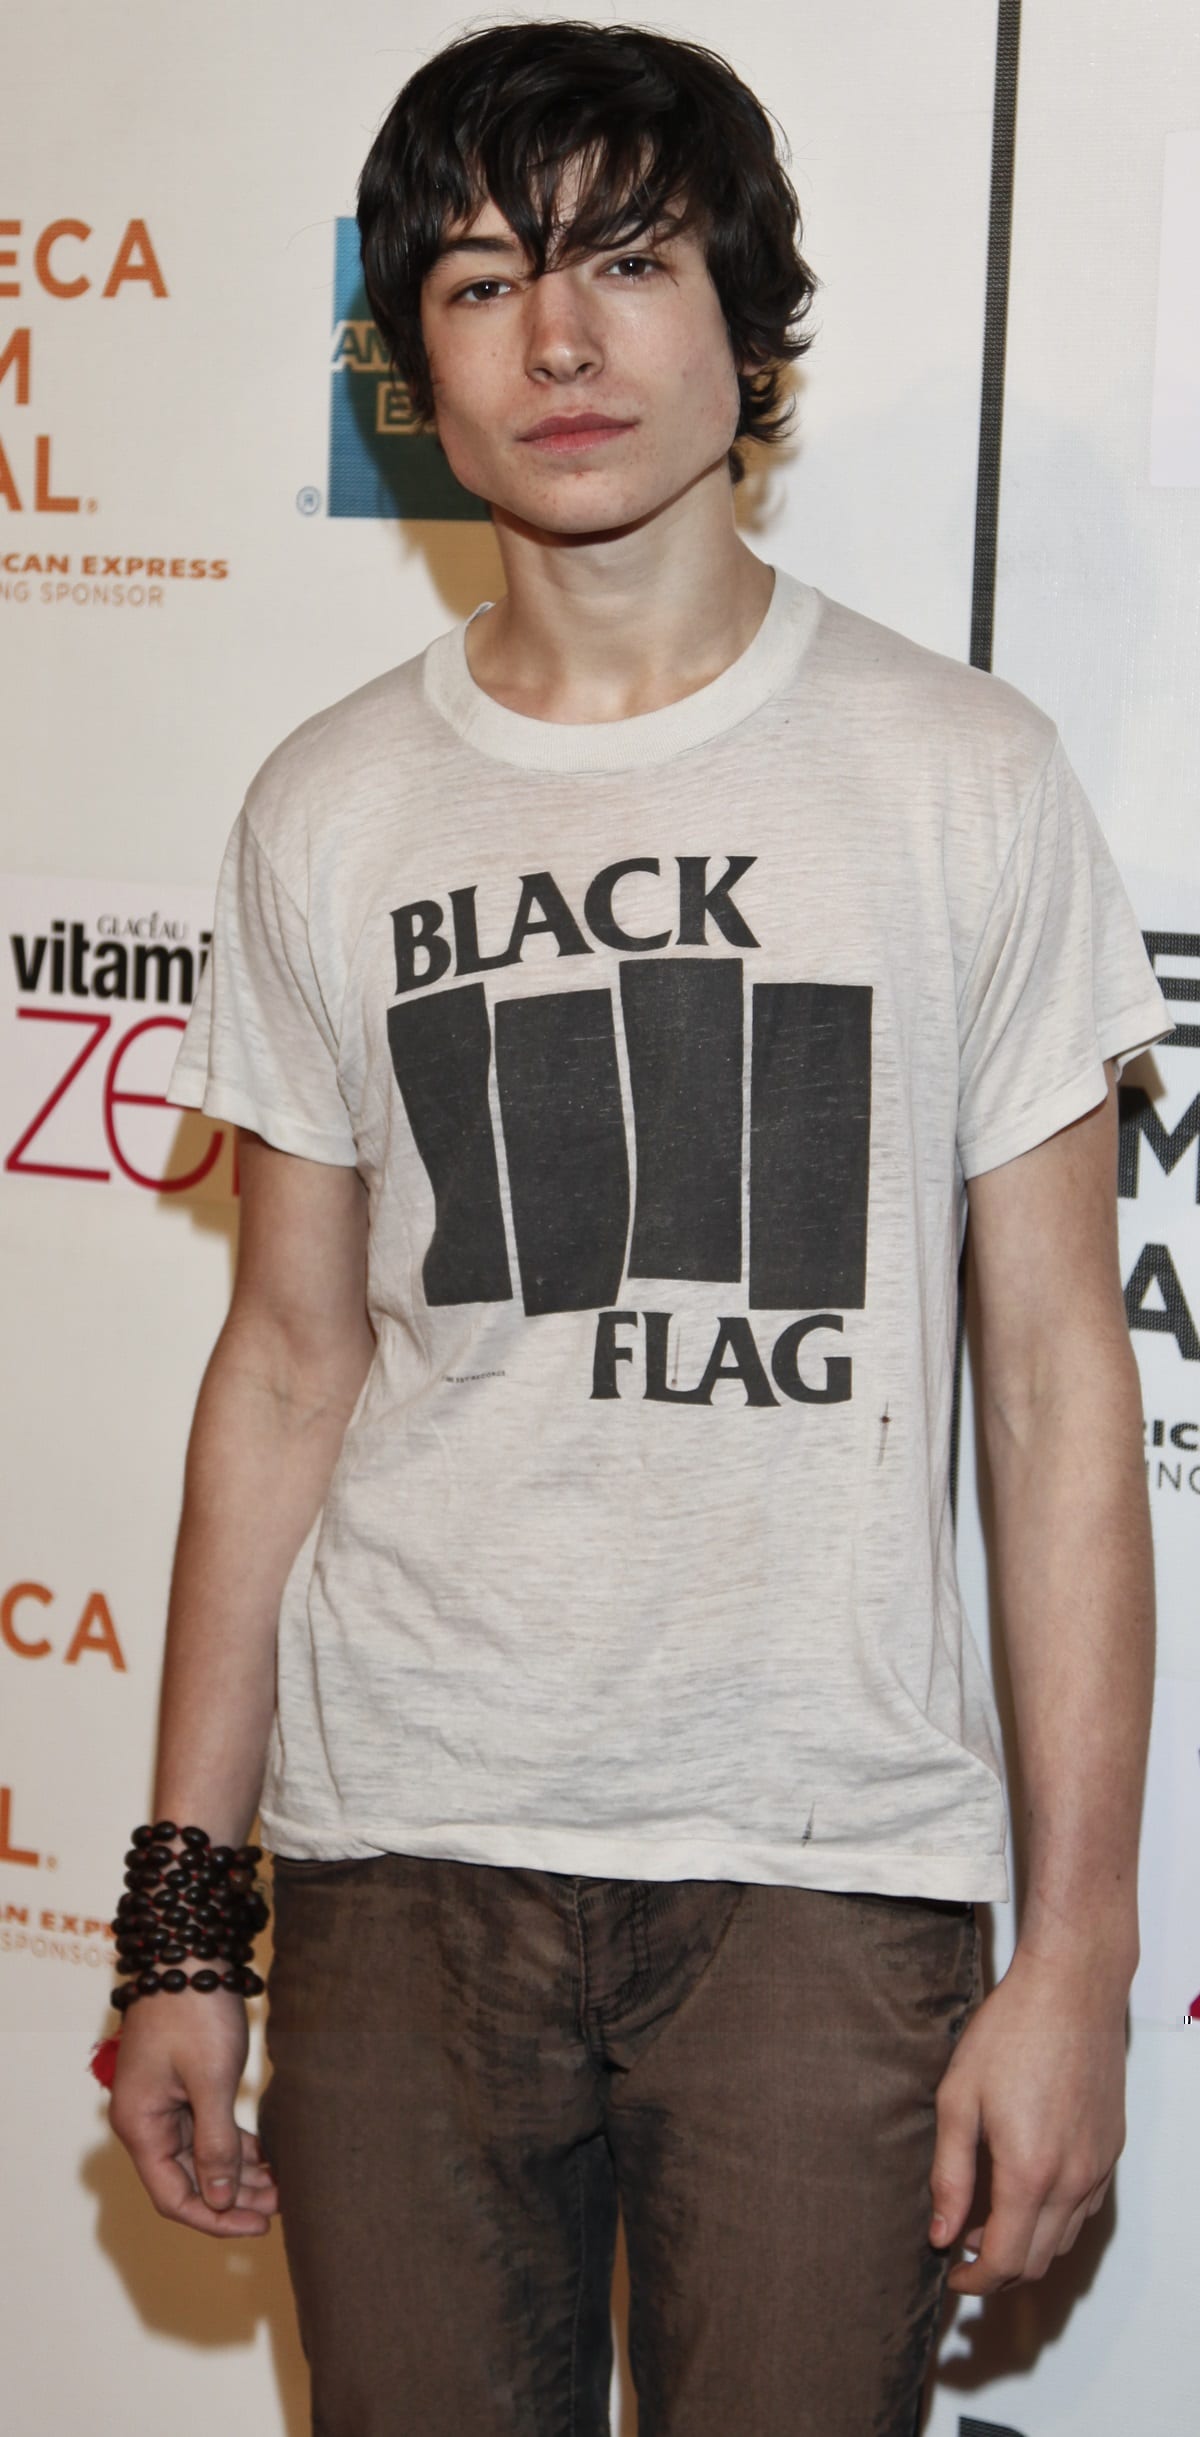 Ezra Miller attending the premiere of Every Day during the 2010 Tribeca Film Festival